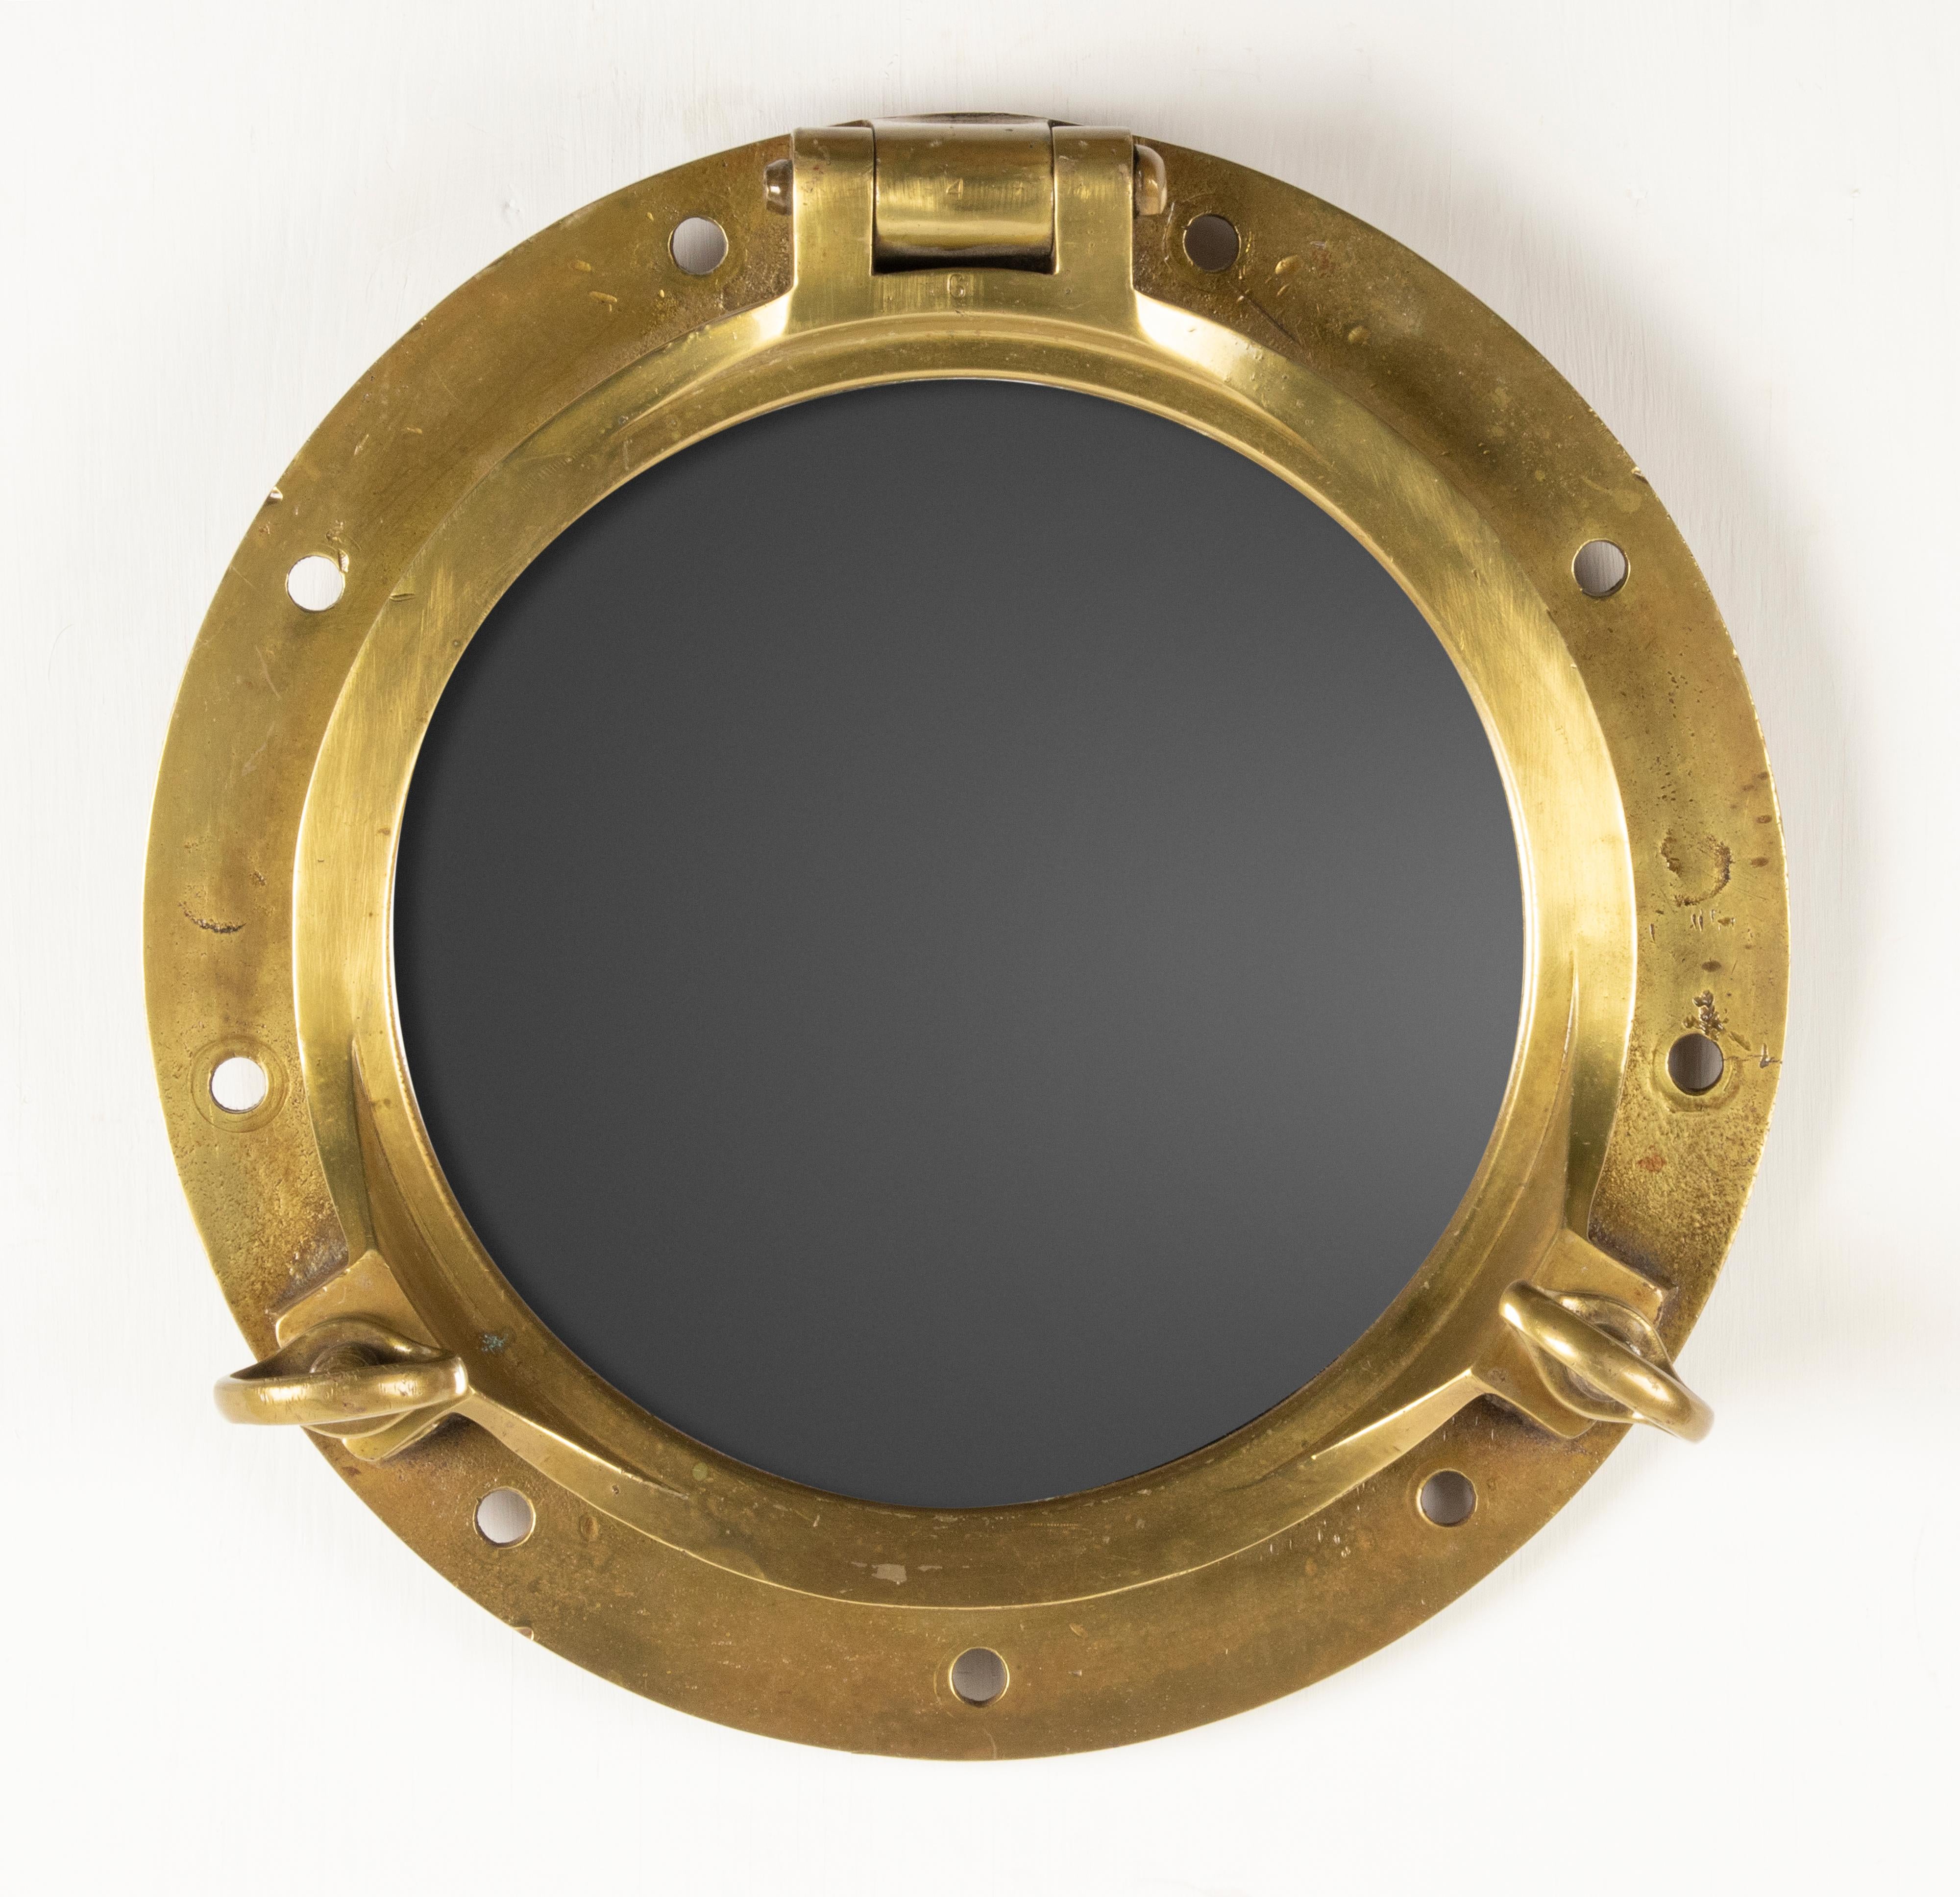 An antique heavy duty ship porthole wall mirror made of brass. A mirror glass has been placed inside. The whole has a beautiful old patina. The original glass is removed and replaced by a mirror glass, the original glass is still intact, it can be